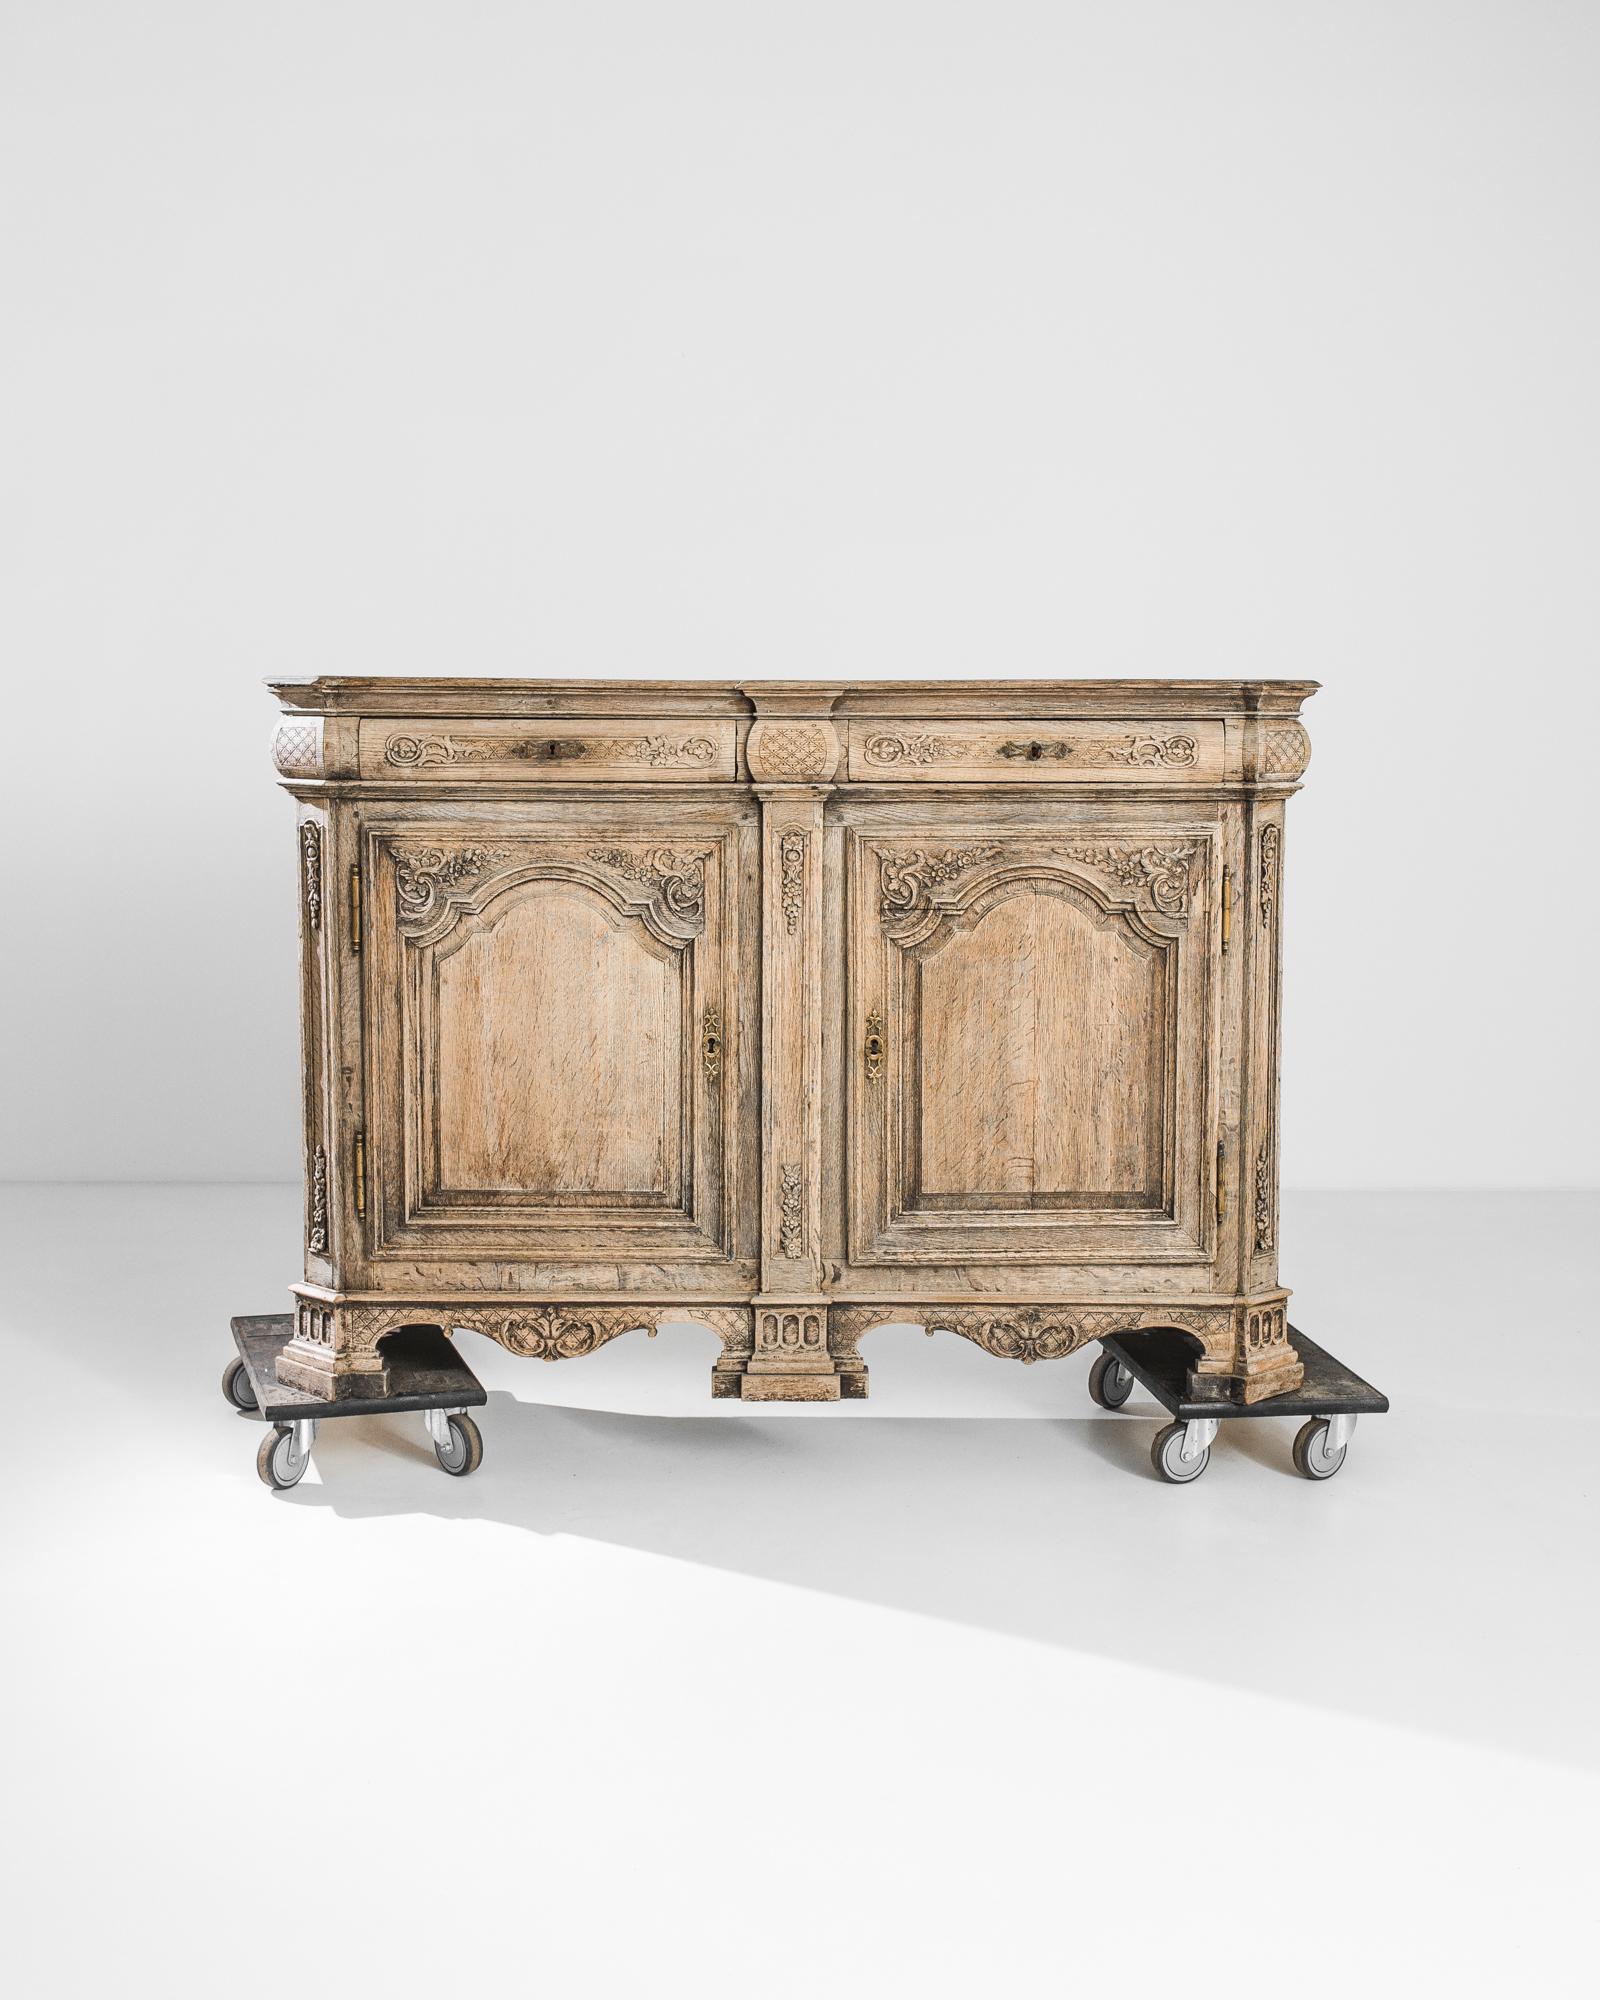 Abundant carving and a striking silhouette give this oak buffet an ornate Neo-renaissance aesthetic. Made in Belgium, circa 1800, a pair of serpentine drawers sit atop a faceted cabinet, elevated upon elaborate pedestal feet. The corners of the